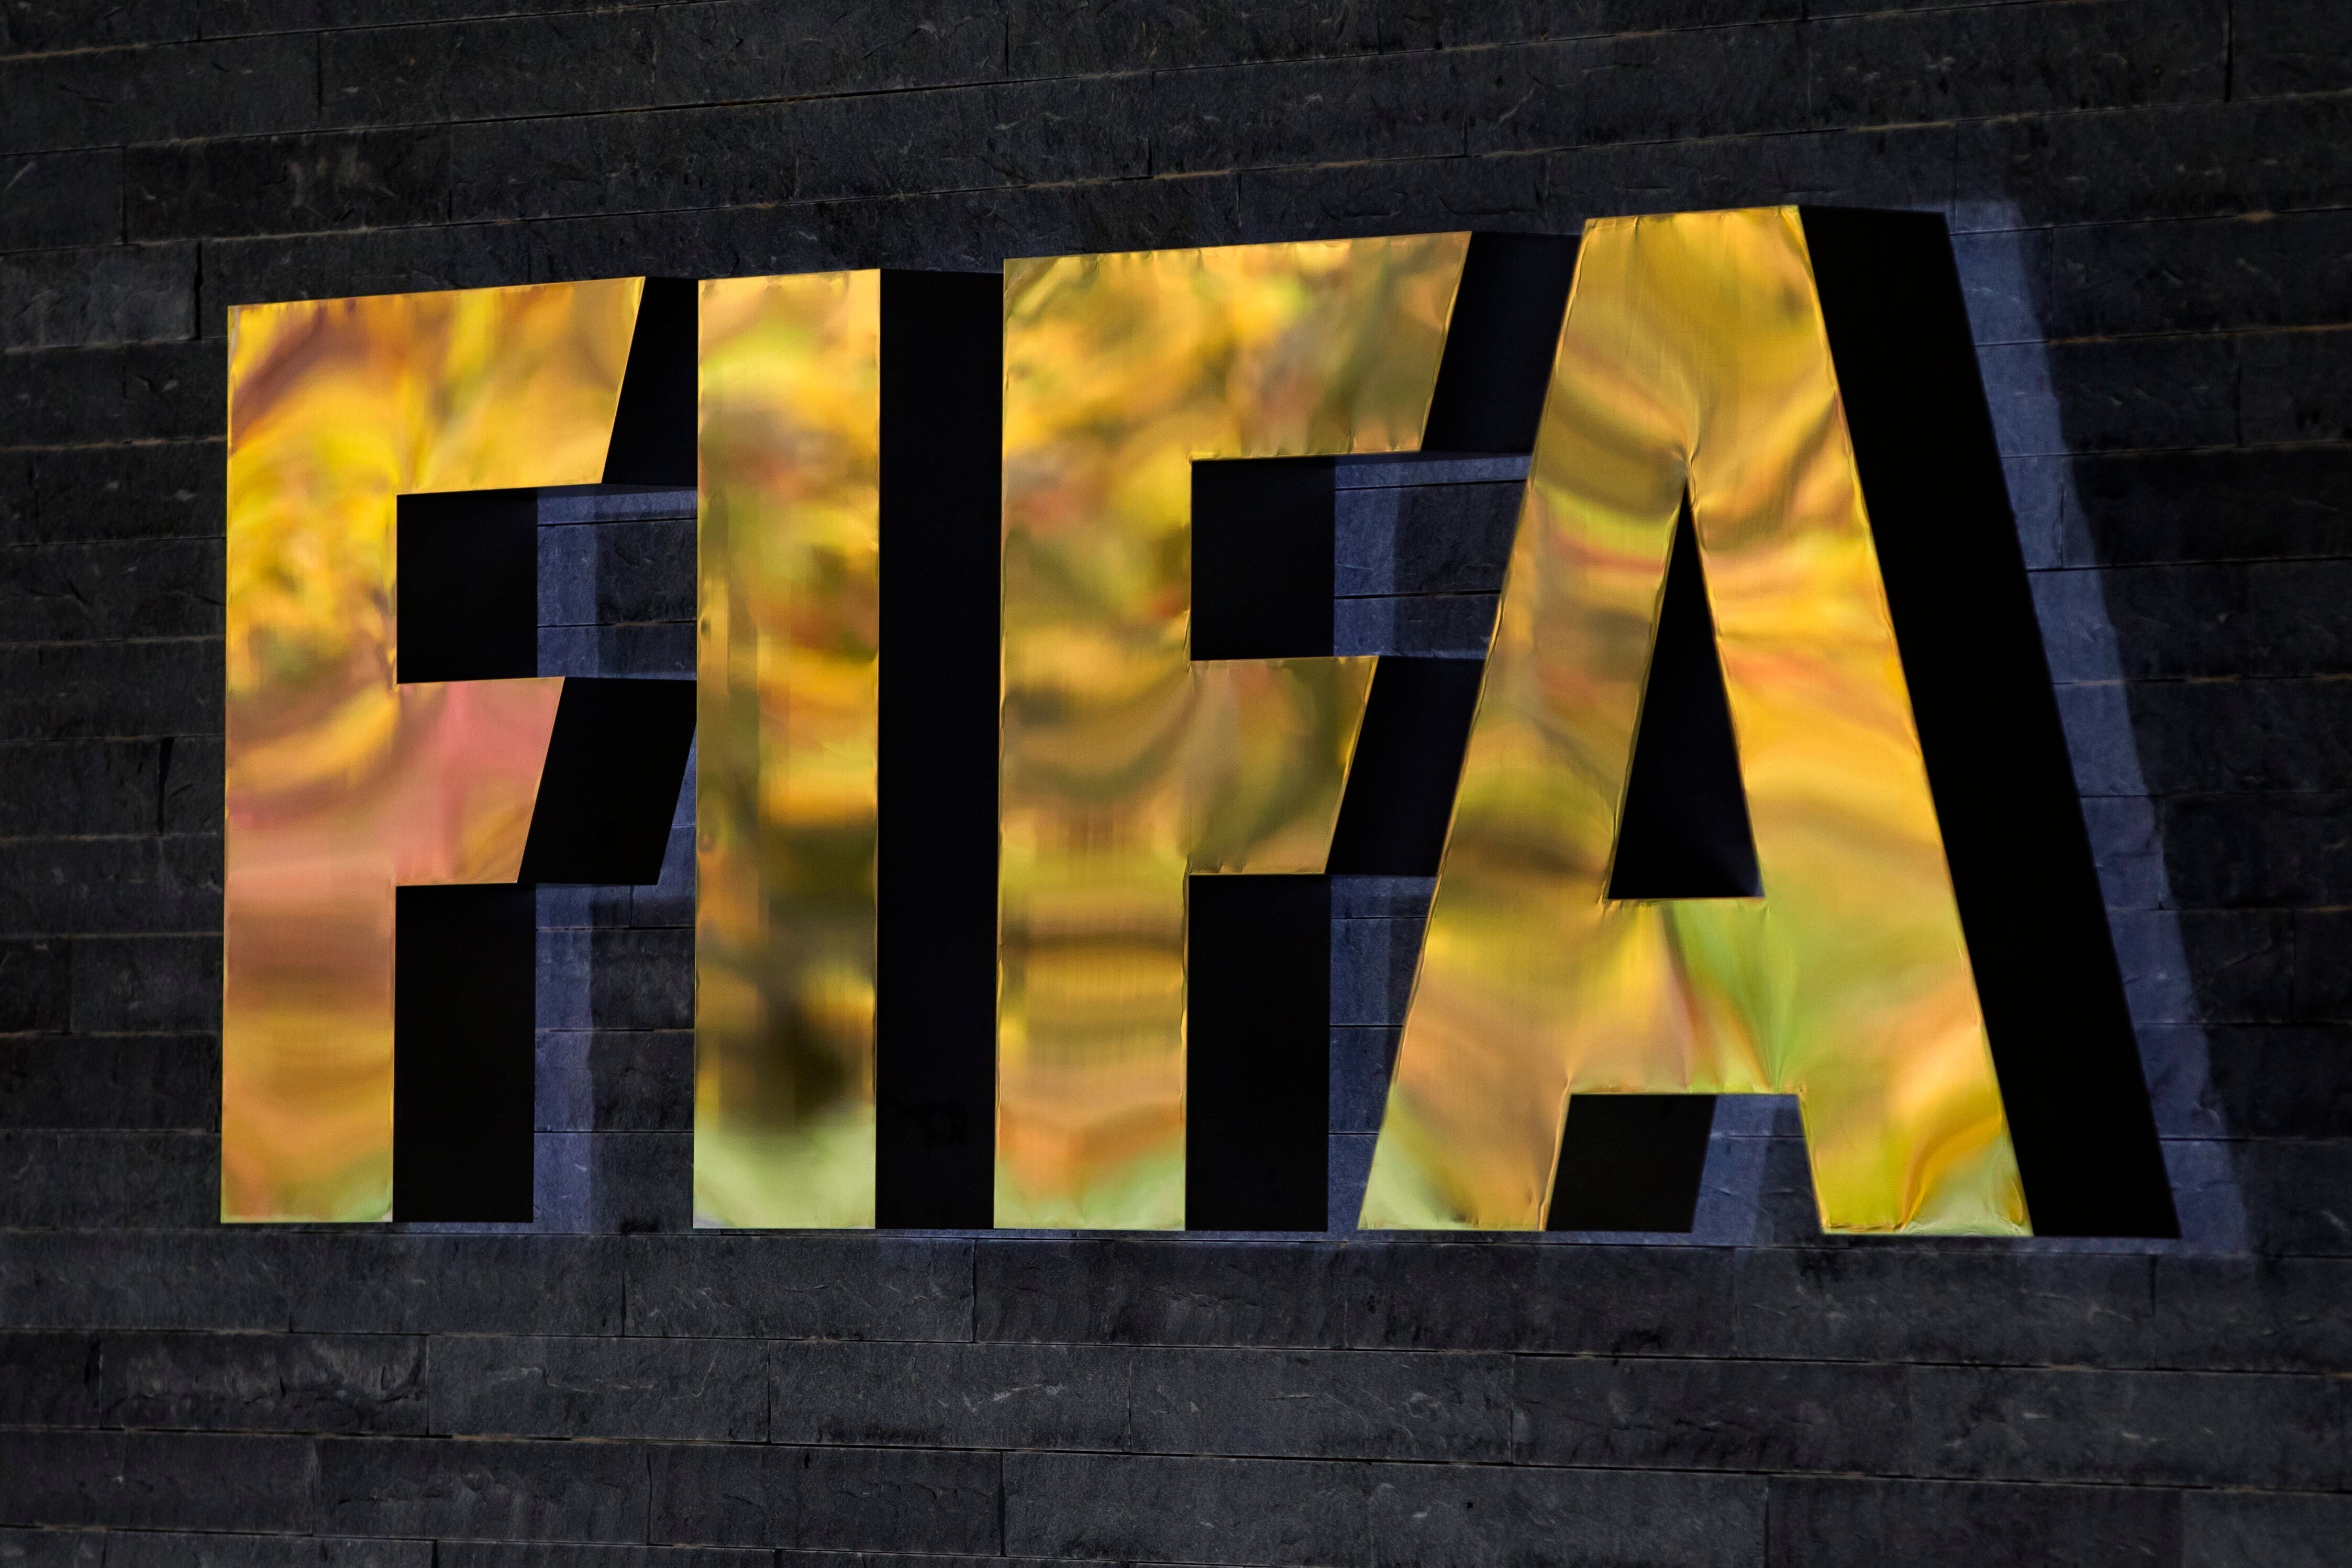 The situation has been described as a ‘total mess’ by some, with fingers pointing at Fifa